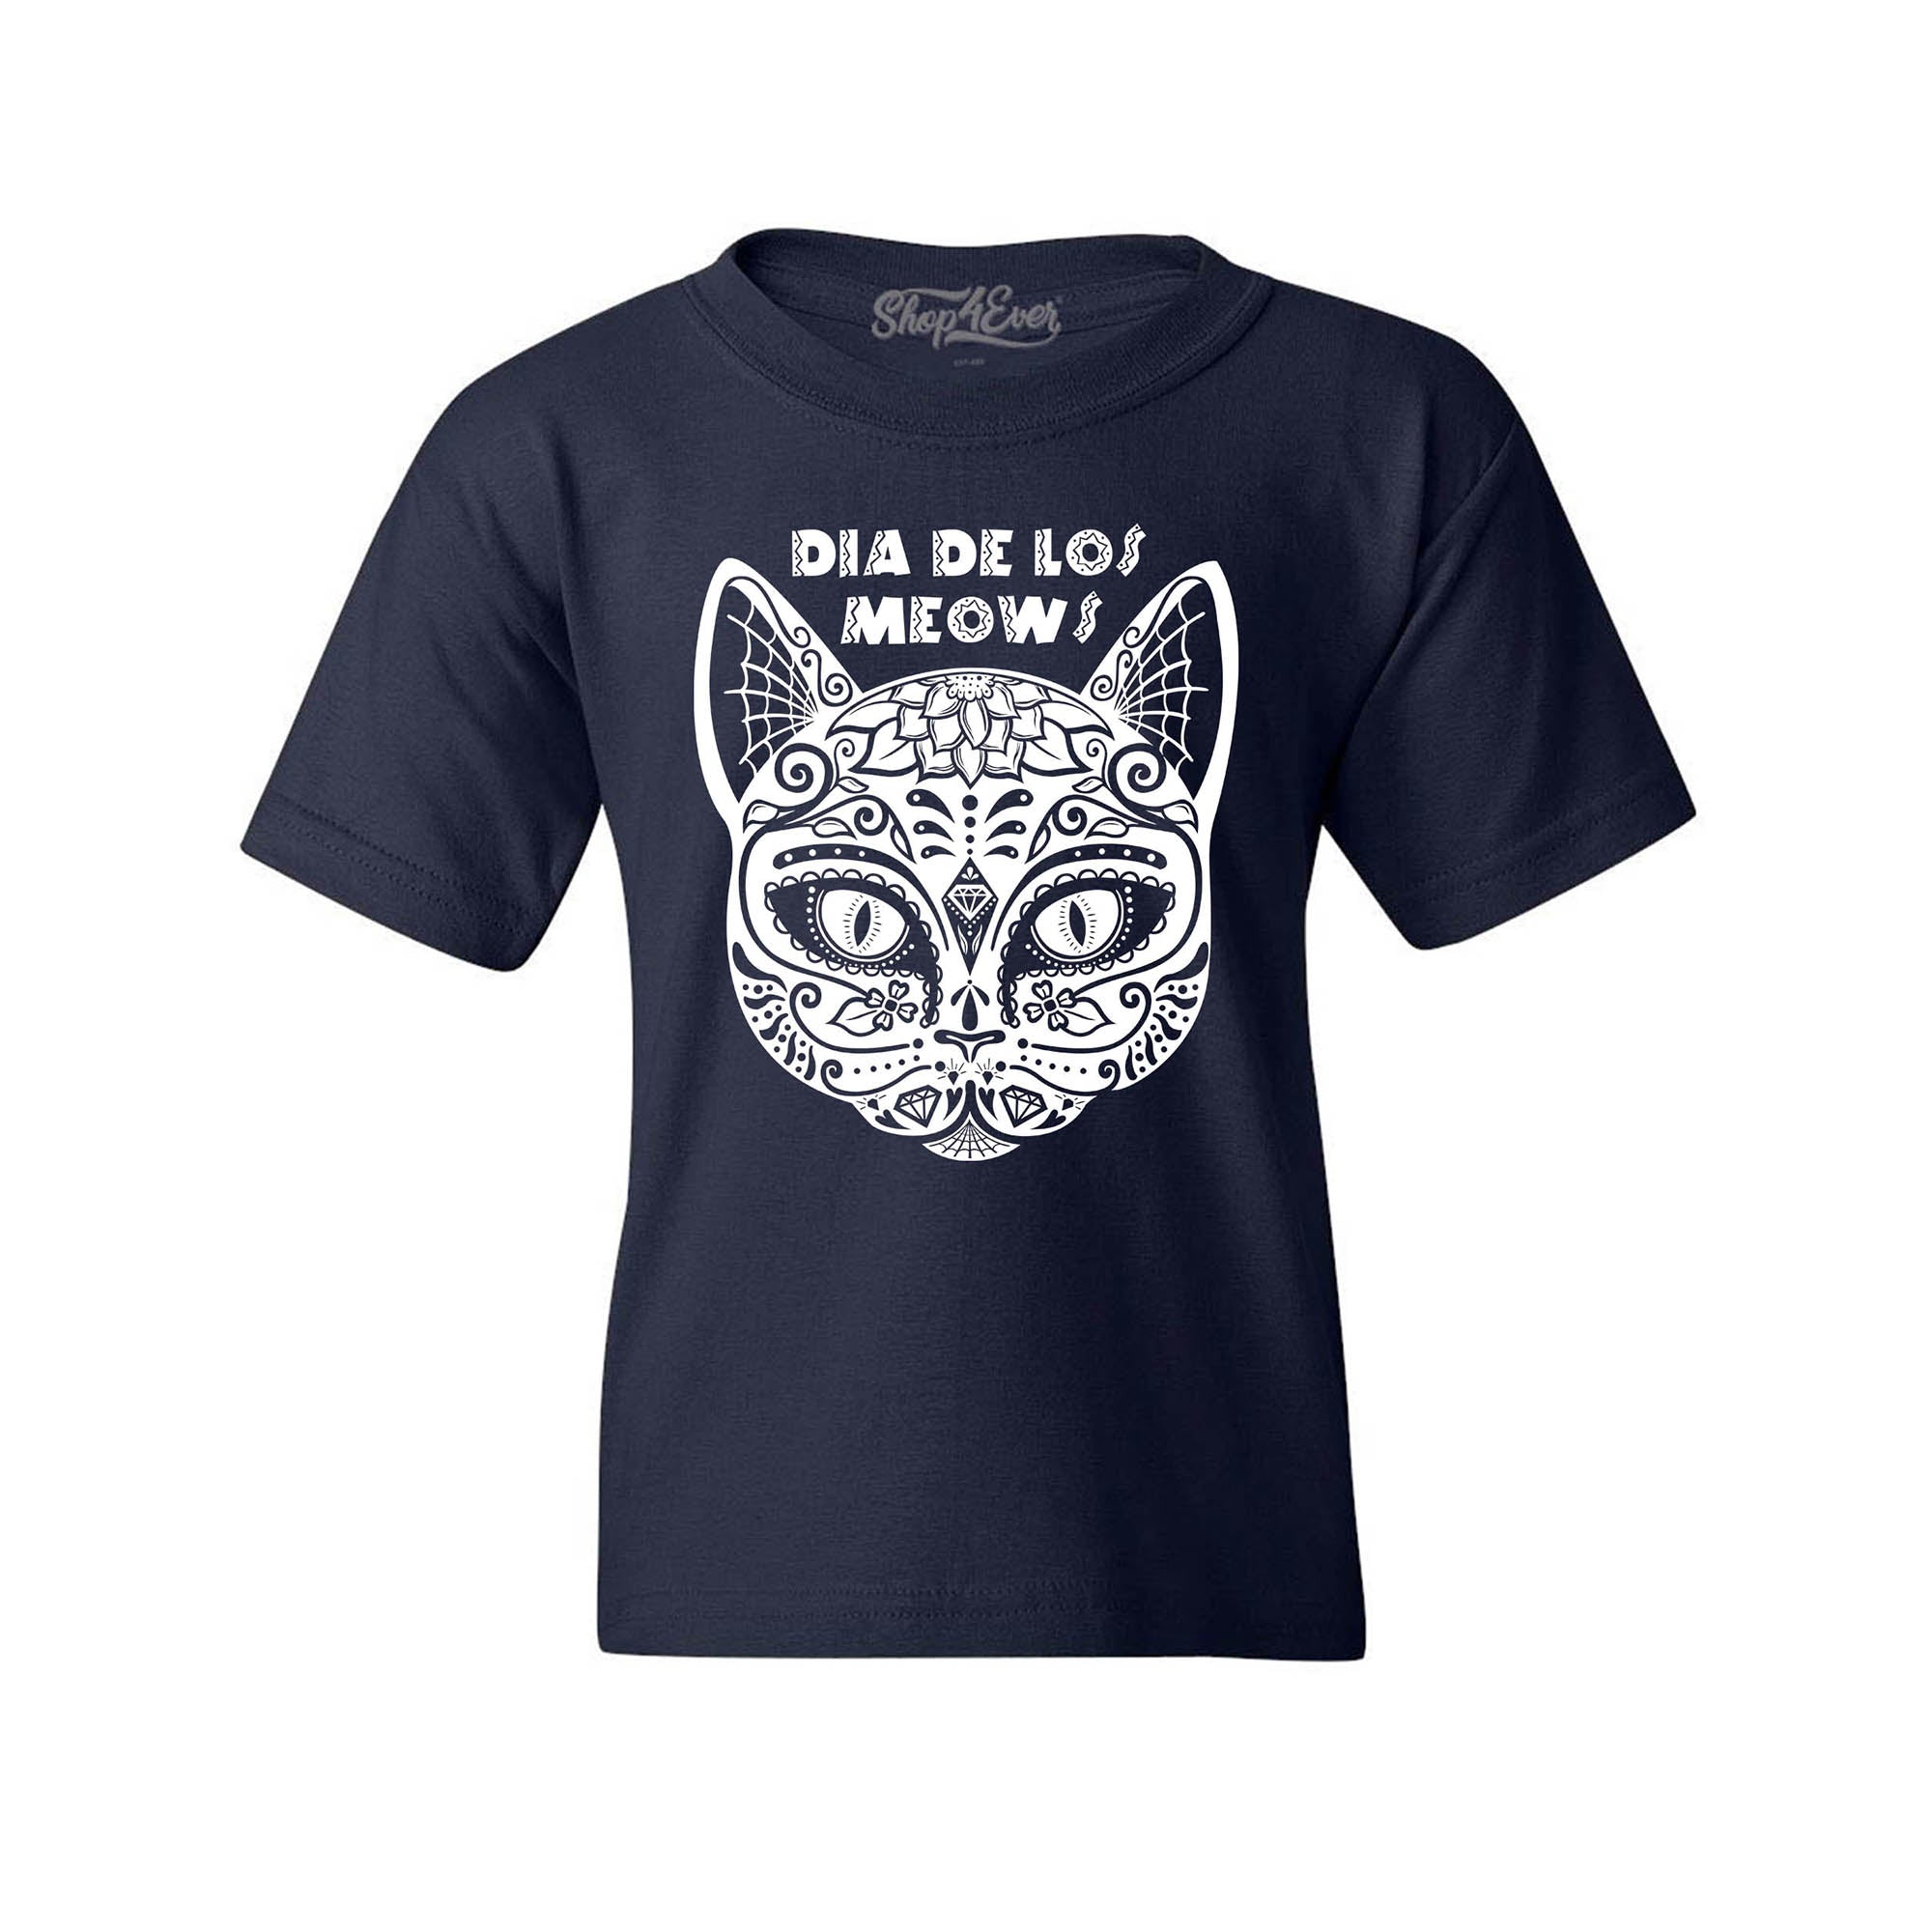 Dia De Los Meows Day of The Dead Youth's T-Shirt